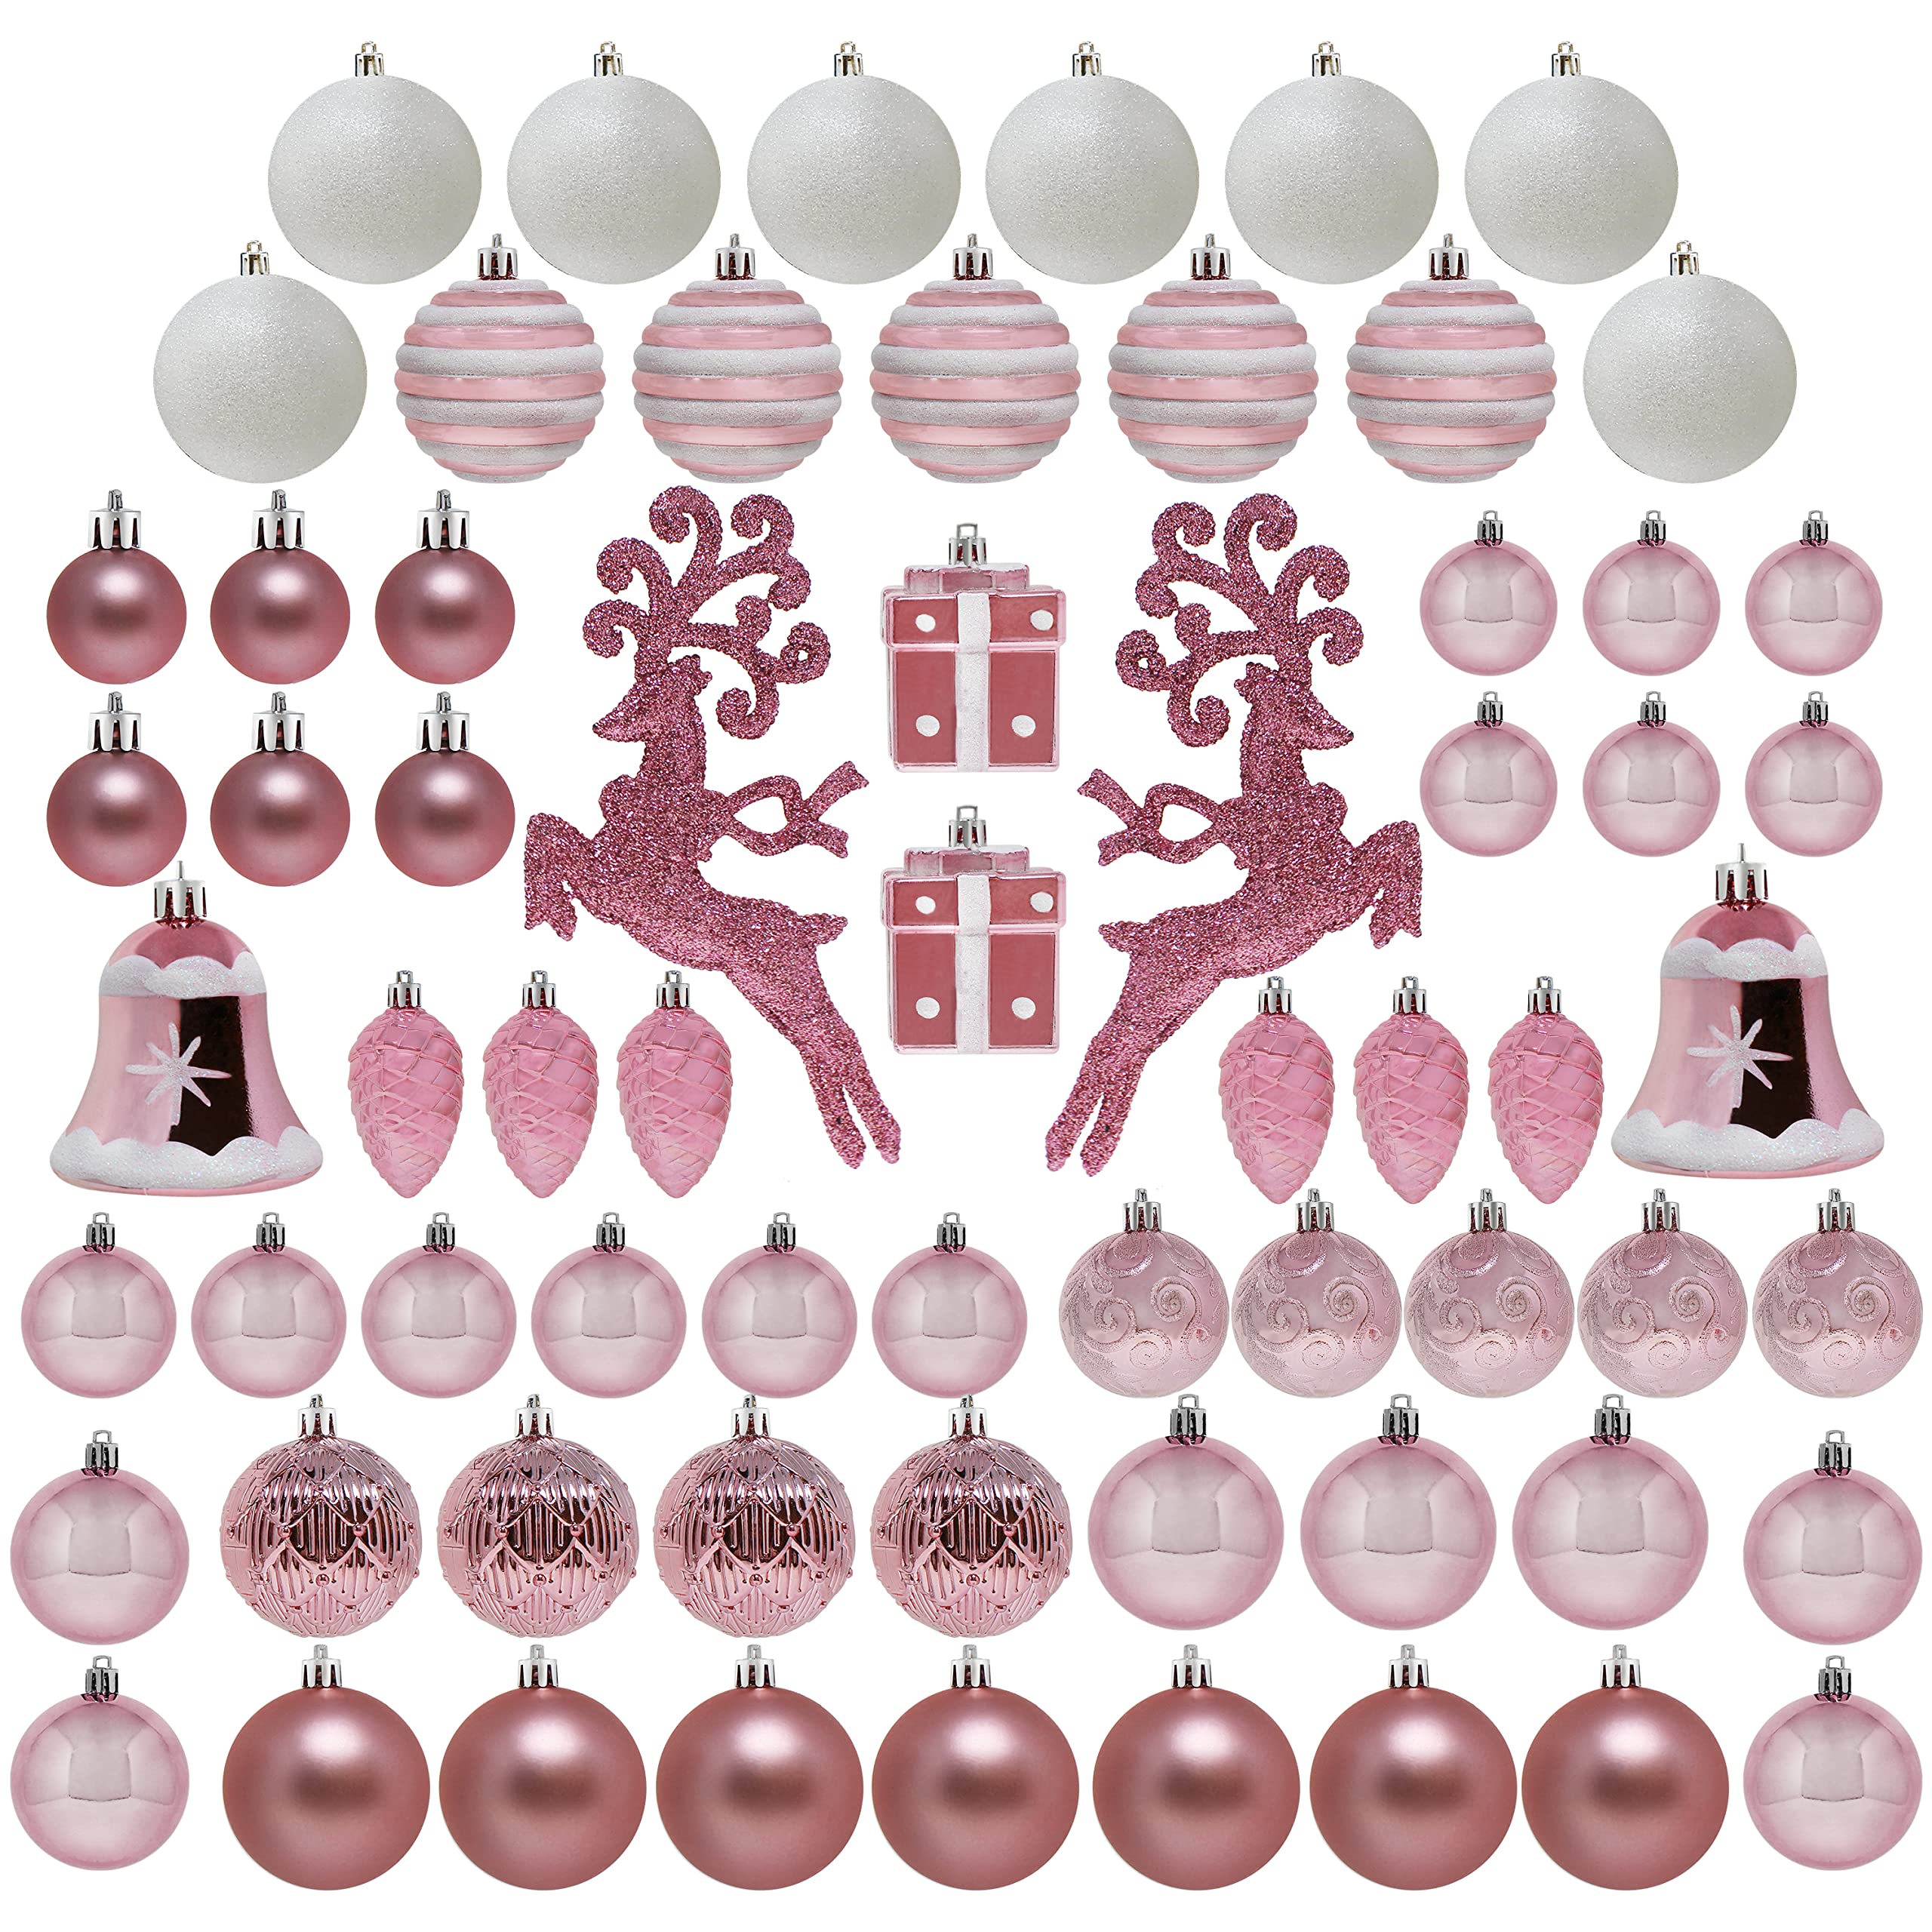 Joiedomi 66 Pcs Christmas Assorted Ornaments, Shatterproof Christmas Ornaments for Holidays, Party Decoration, Tree Ornaments, Events, and Christmas (Rose Gold)